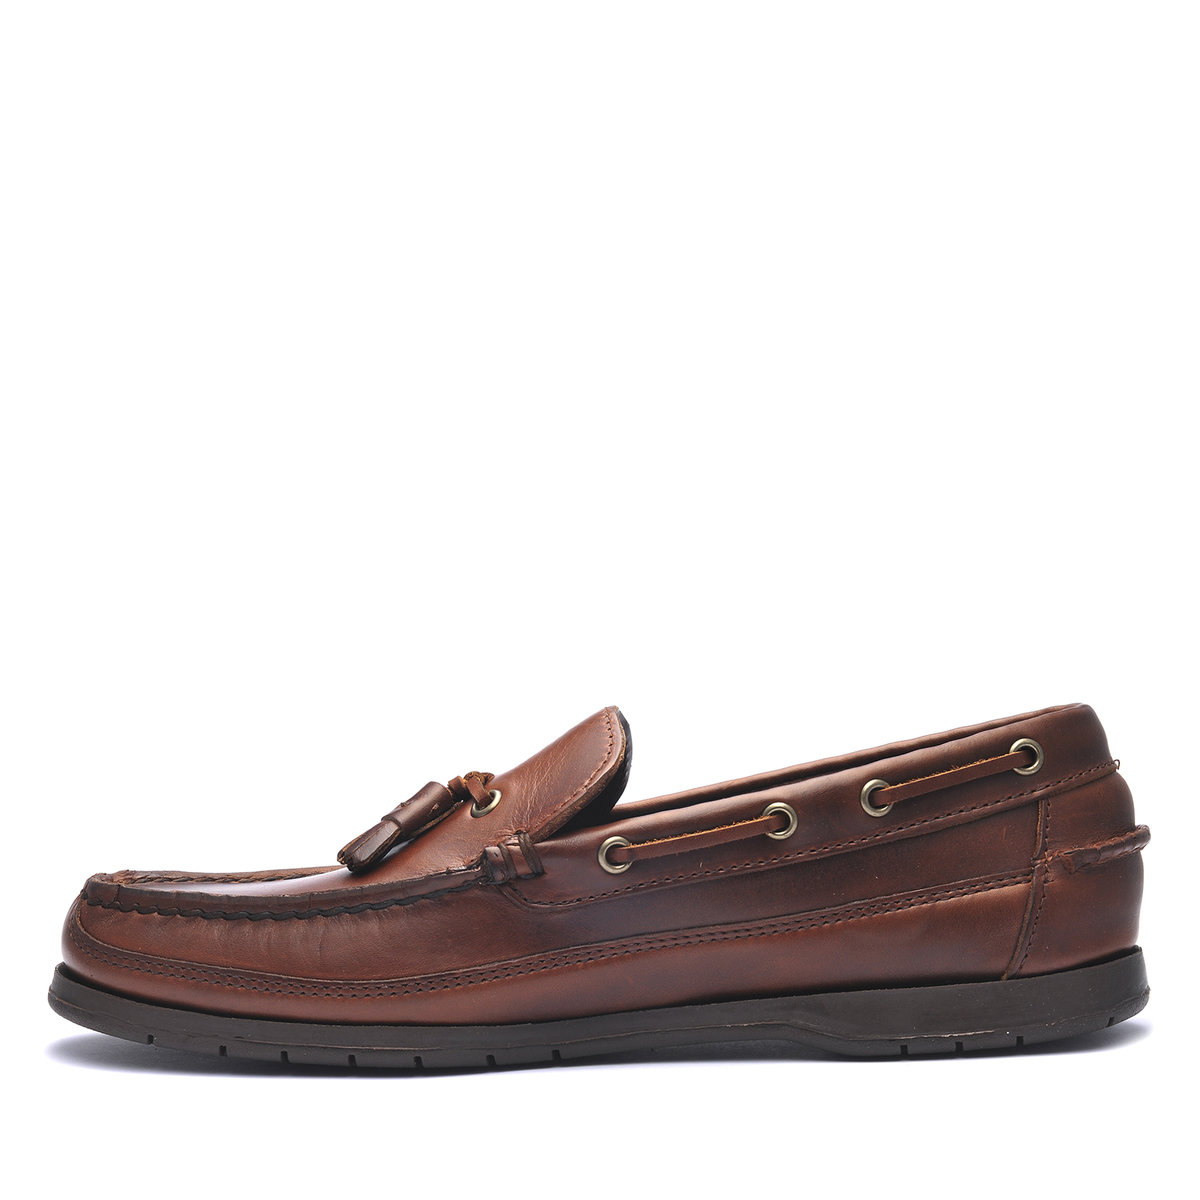 Ketch Waxed Leather Loafer